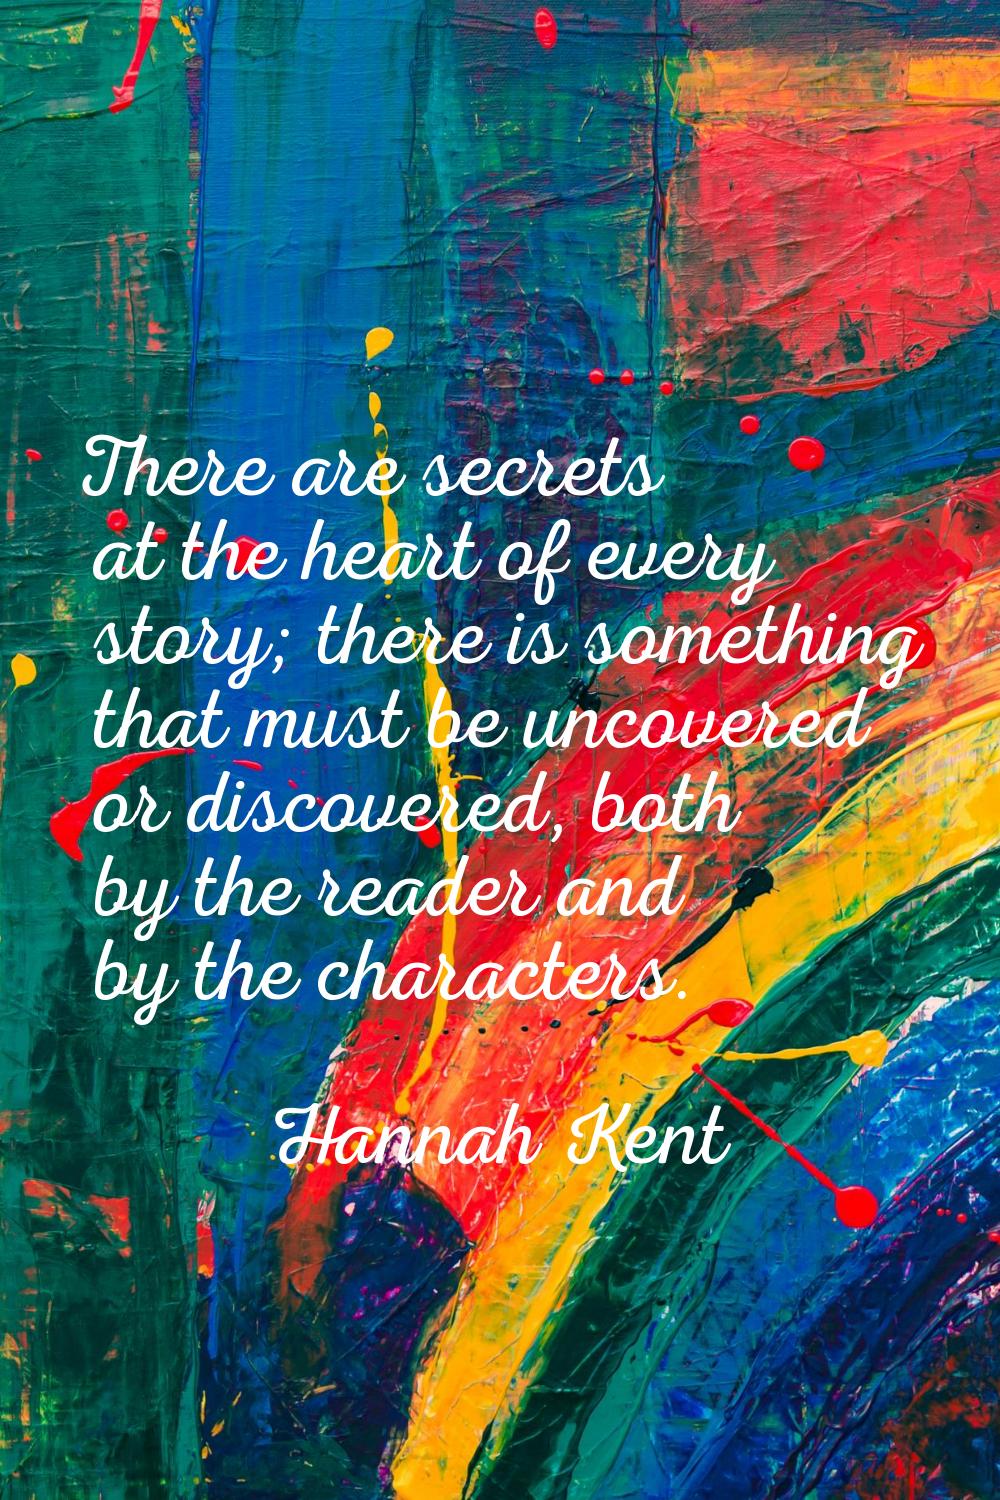 There are secrets at the heart of every story; there is something that must be uncovered or discove